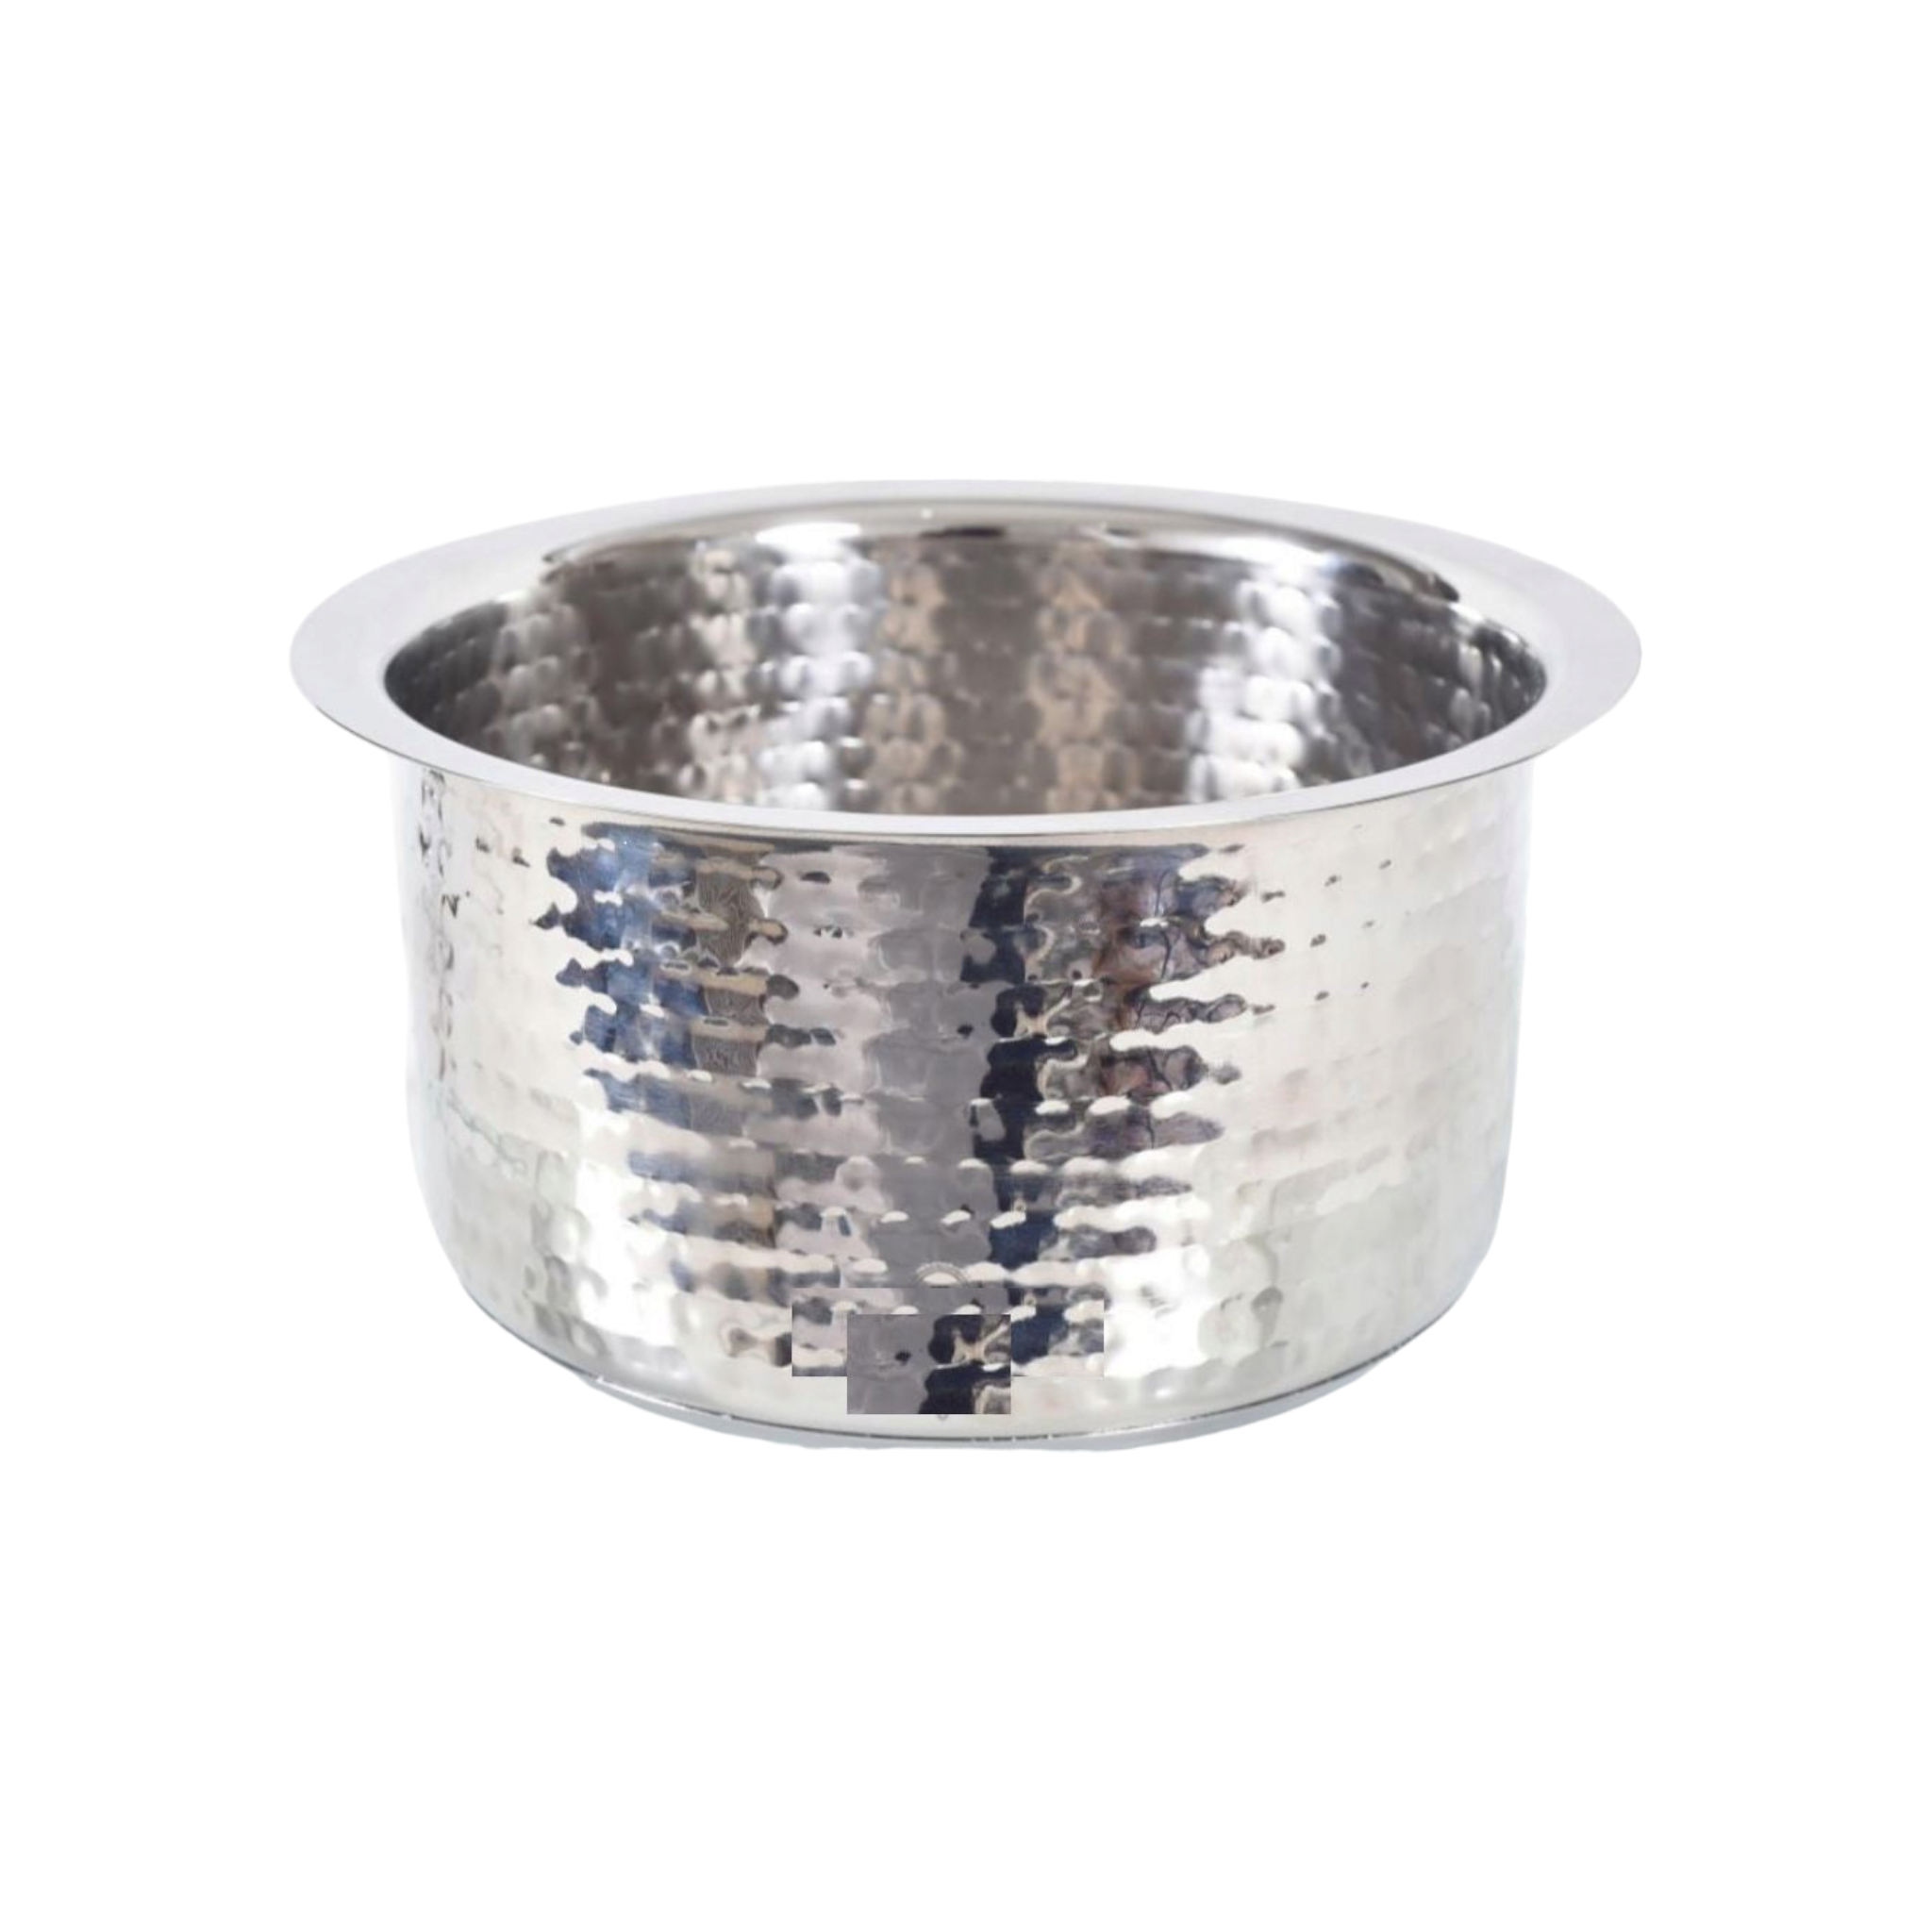 Aluminium Indian Hammered Deep Pot 9.8L with Lid No.21 Round Heavy Duty 6222